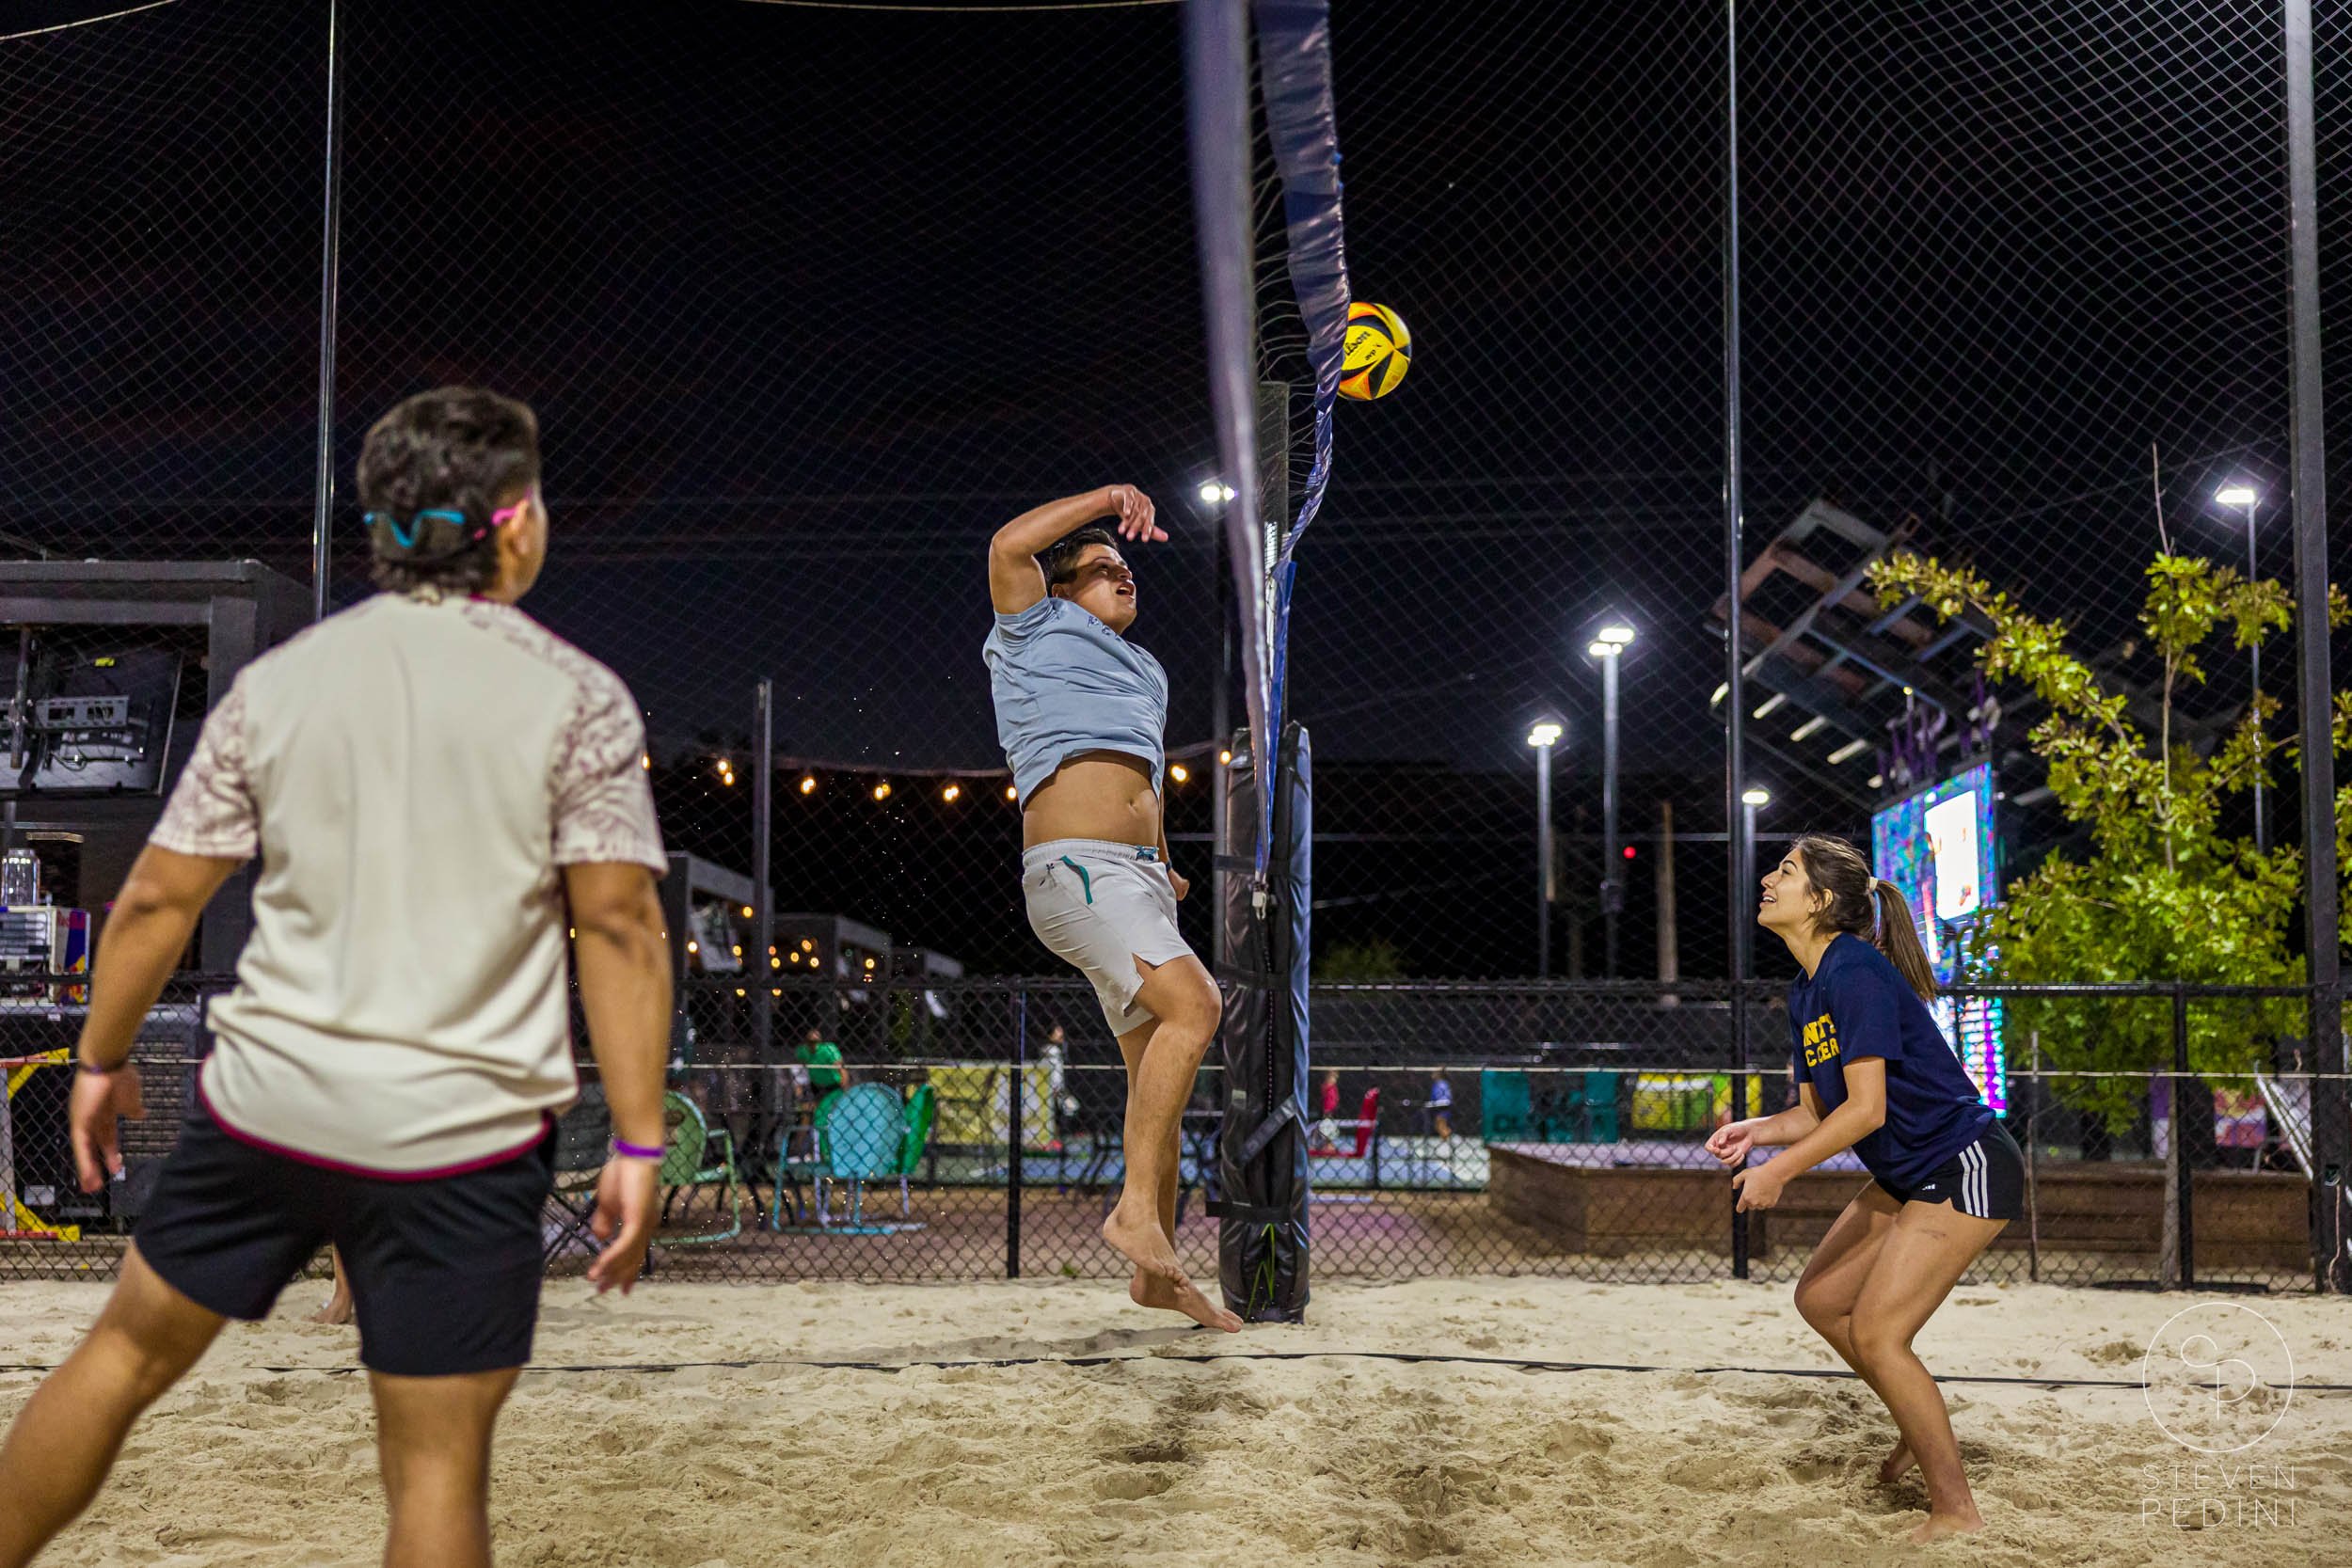 Steven Pedini Photography - Bumpy Pickle - Sand Volleyball - Houston TX - World Cup of Volleyball - 00388.jpg